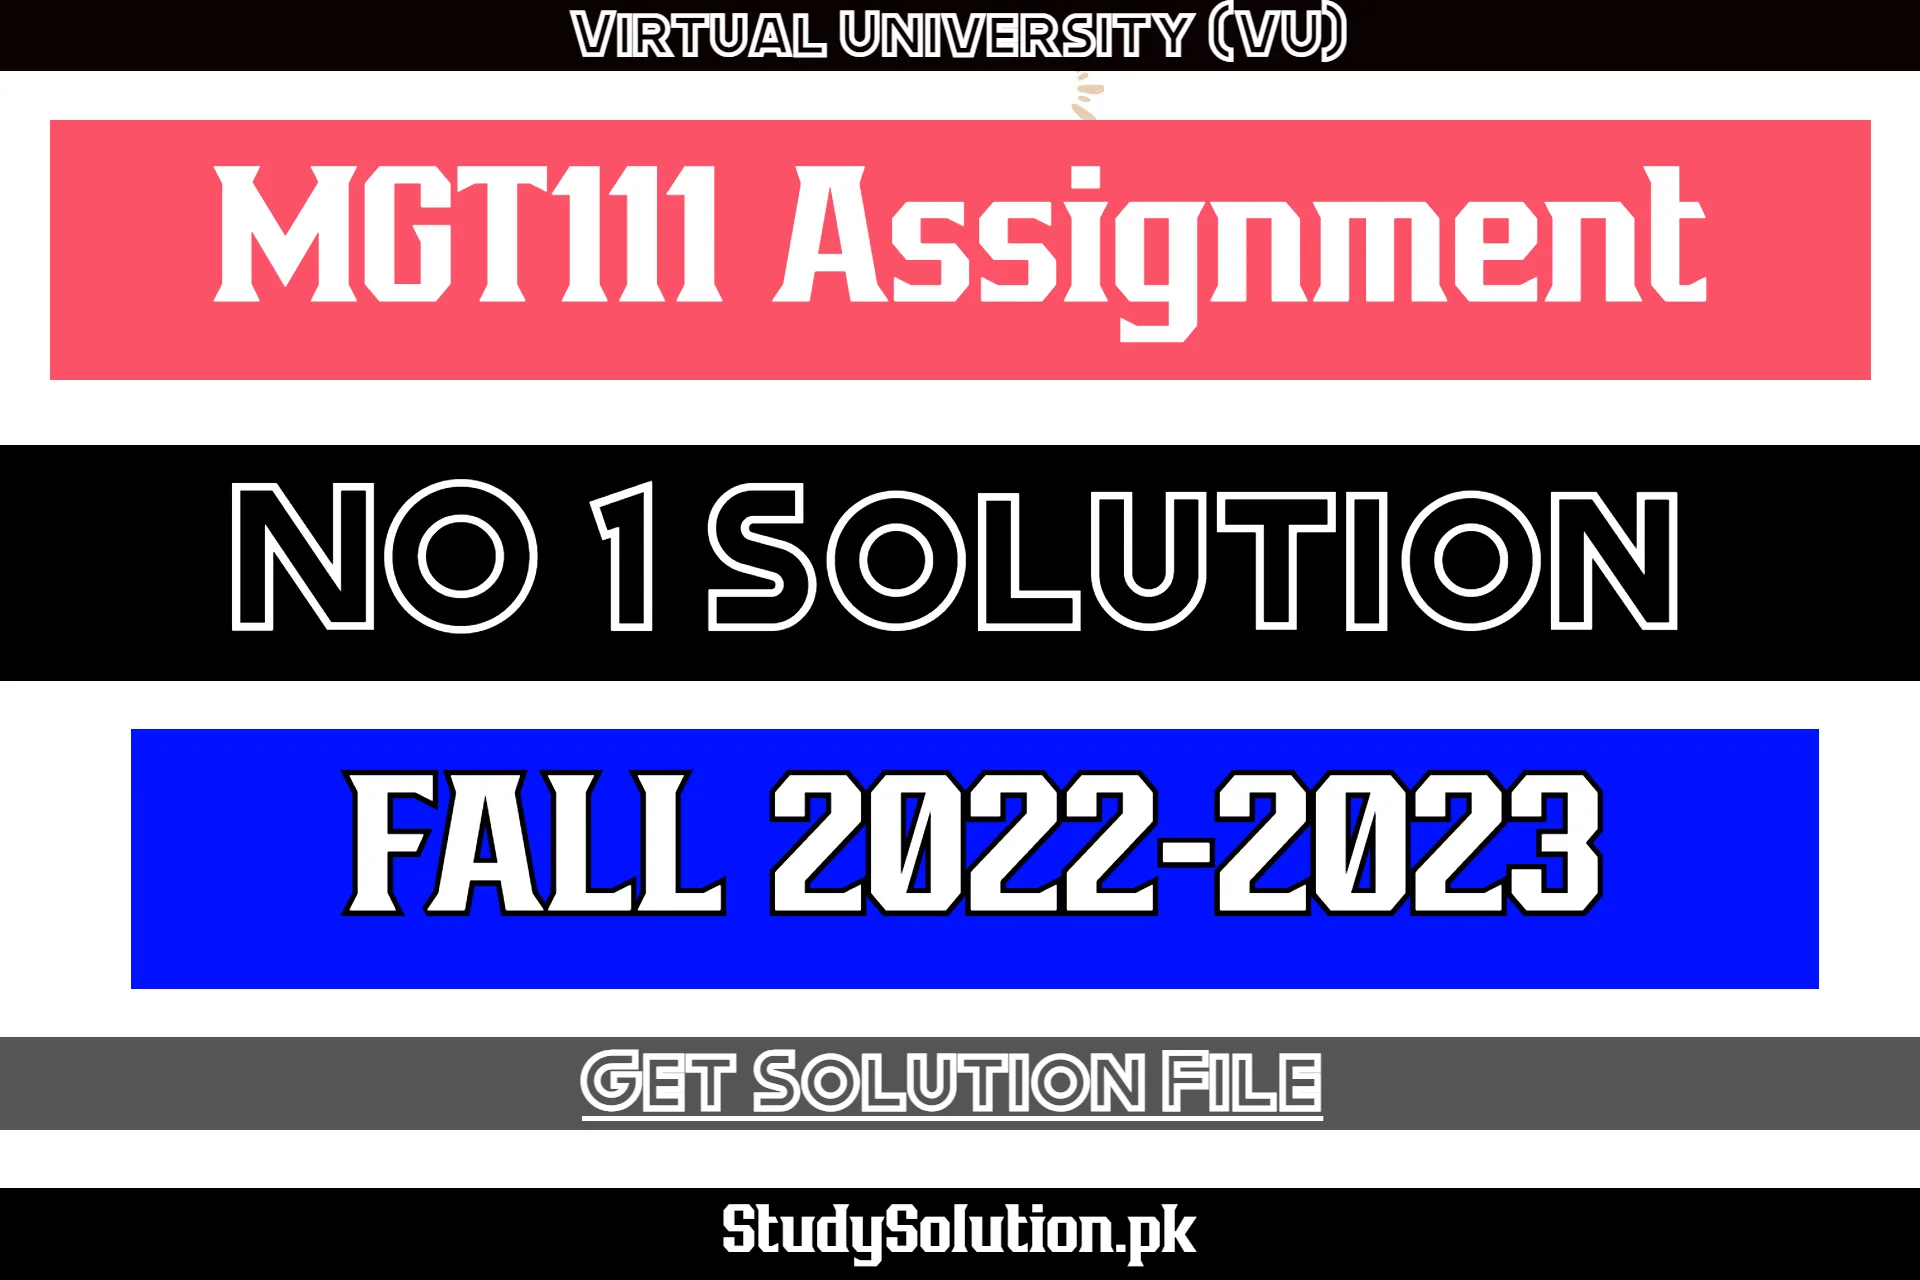 MGT111 Assignment No 1 Solution Fall 2022